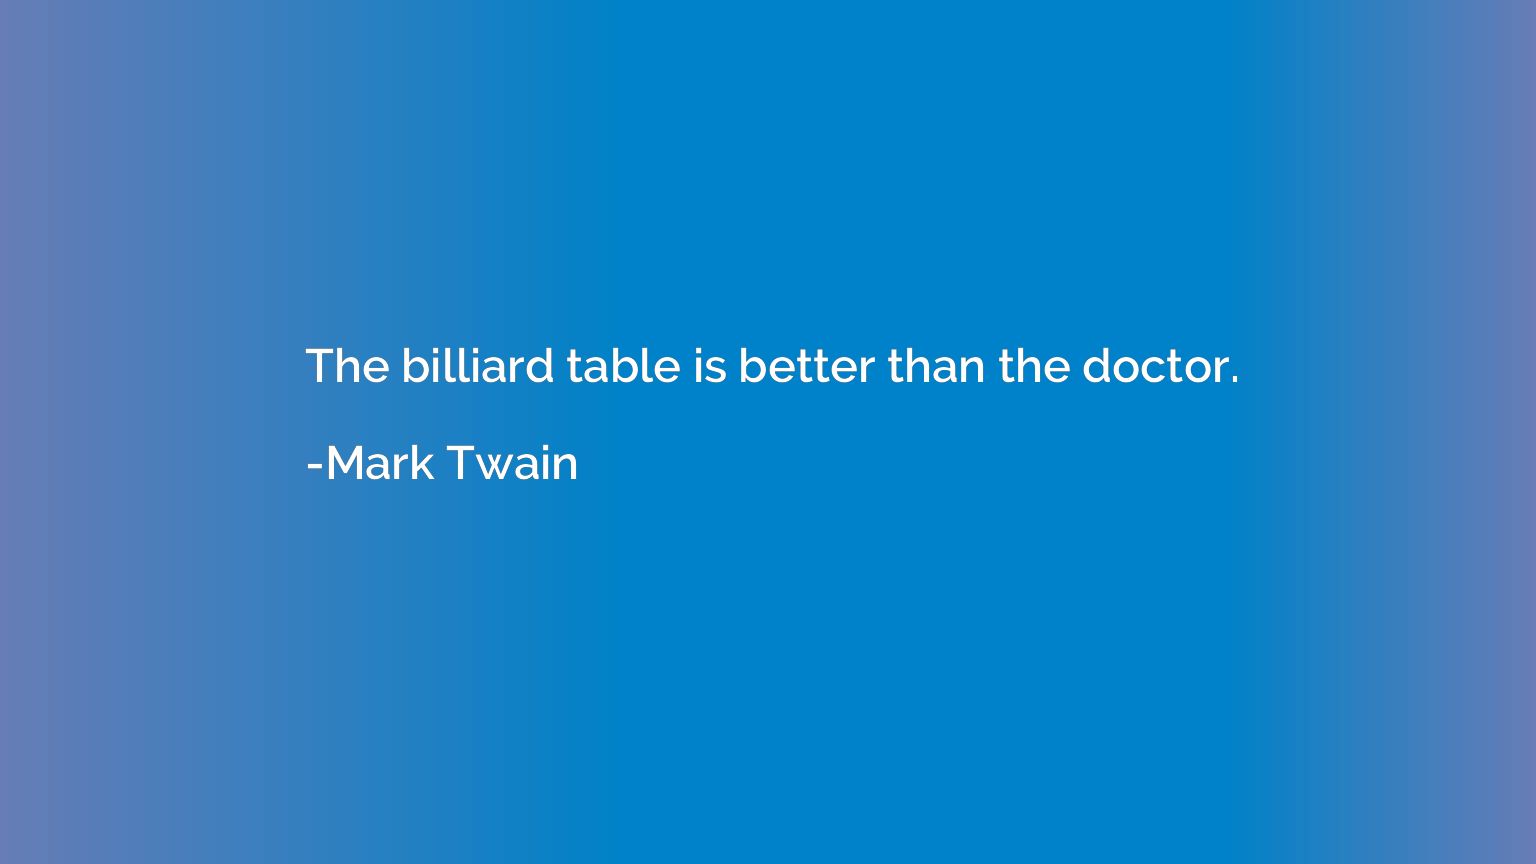 The billiard table is better than the doctor.